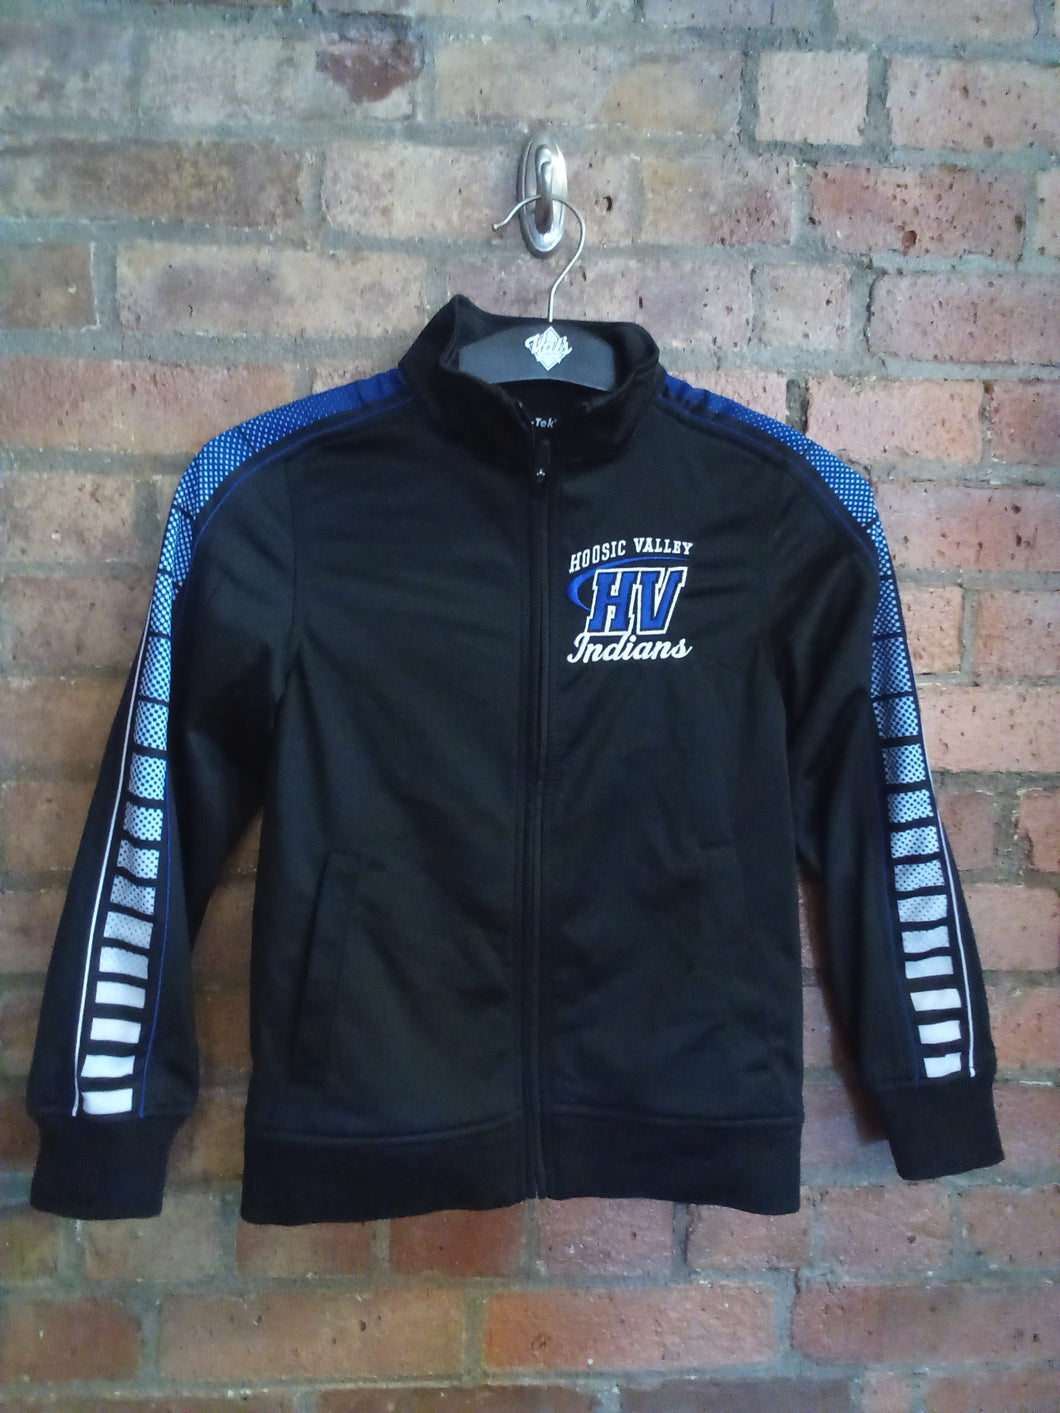 CLEARANCE - Hoosic Valley Indians Youth  Tricot Track Jacket - Size Small